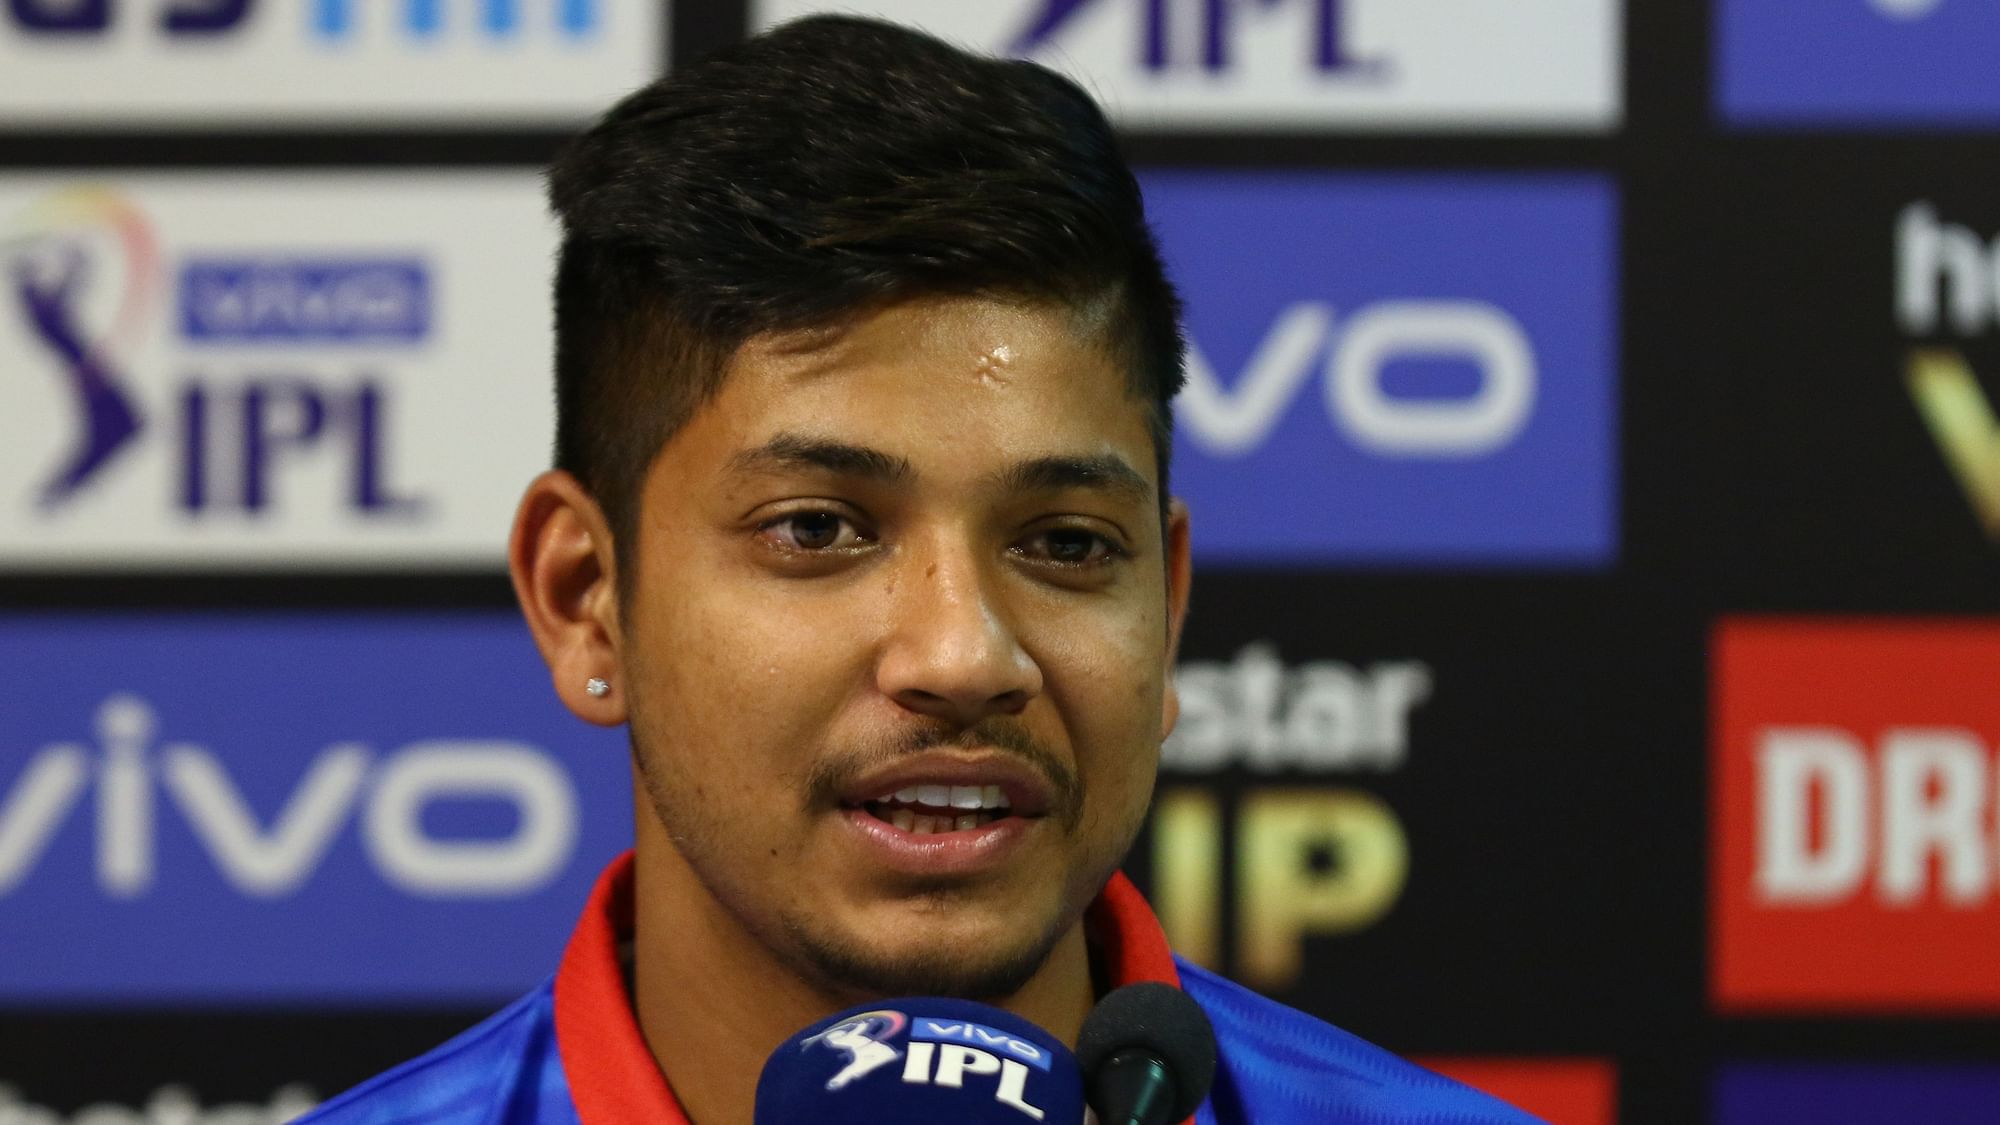 Lamichhane addressed the media after Delhi's win over KXIP.&nbsp;